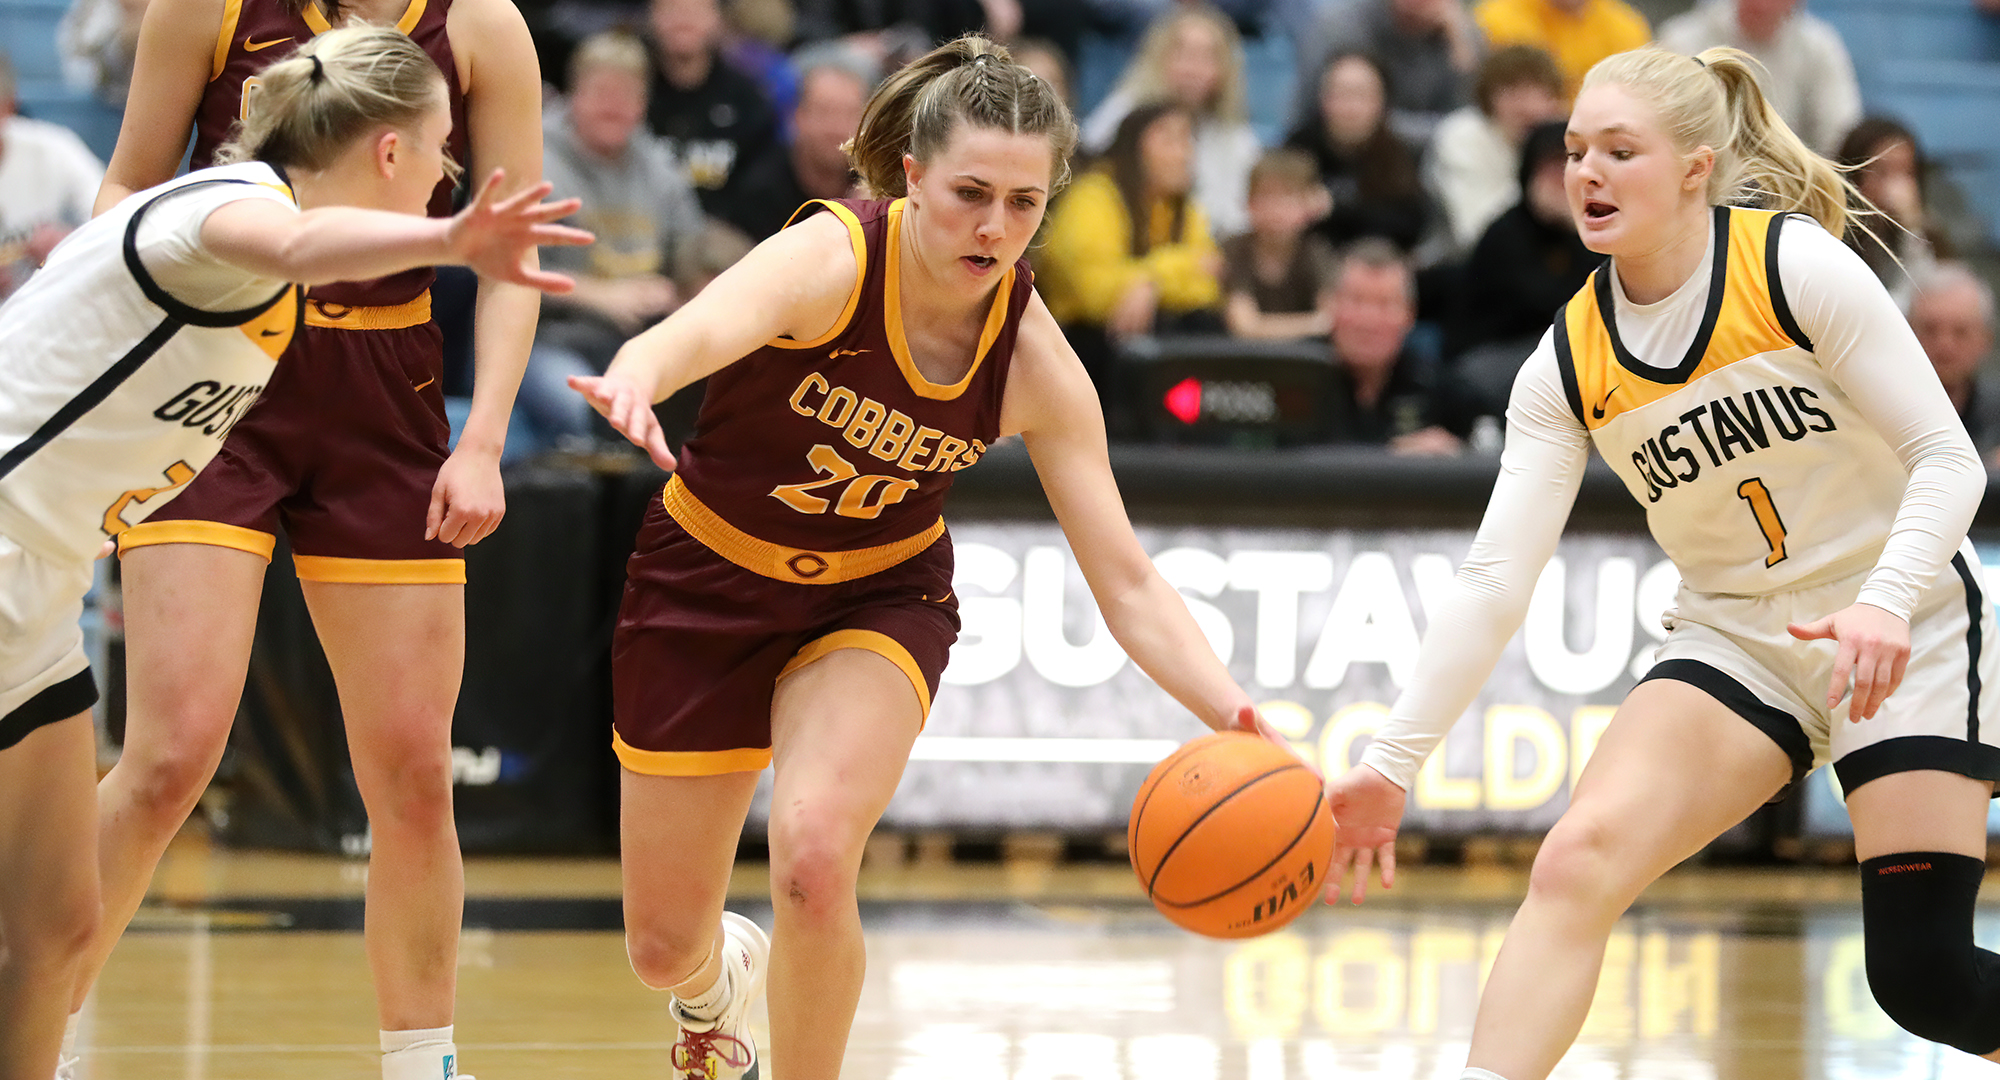 Emily Beseman dribbles through defenders during the Cobbers' game at Gustavus. (Photo courtesy of Piper Otto, Gustavus Sports Information)